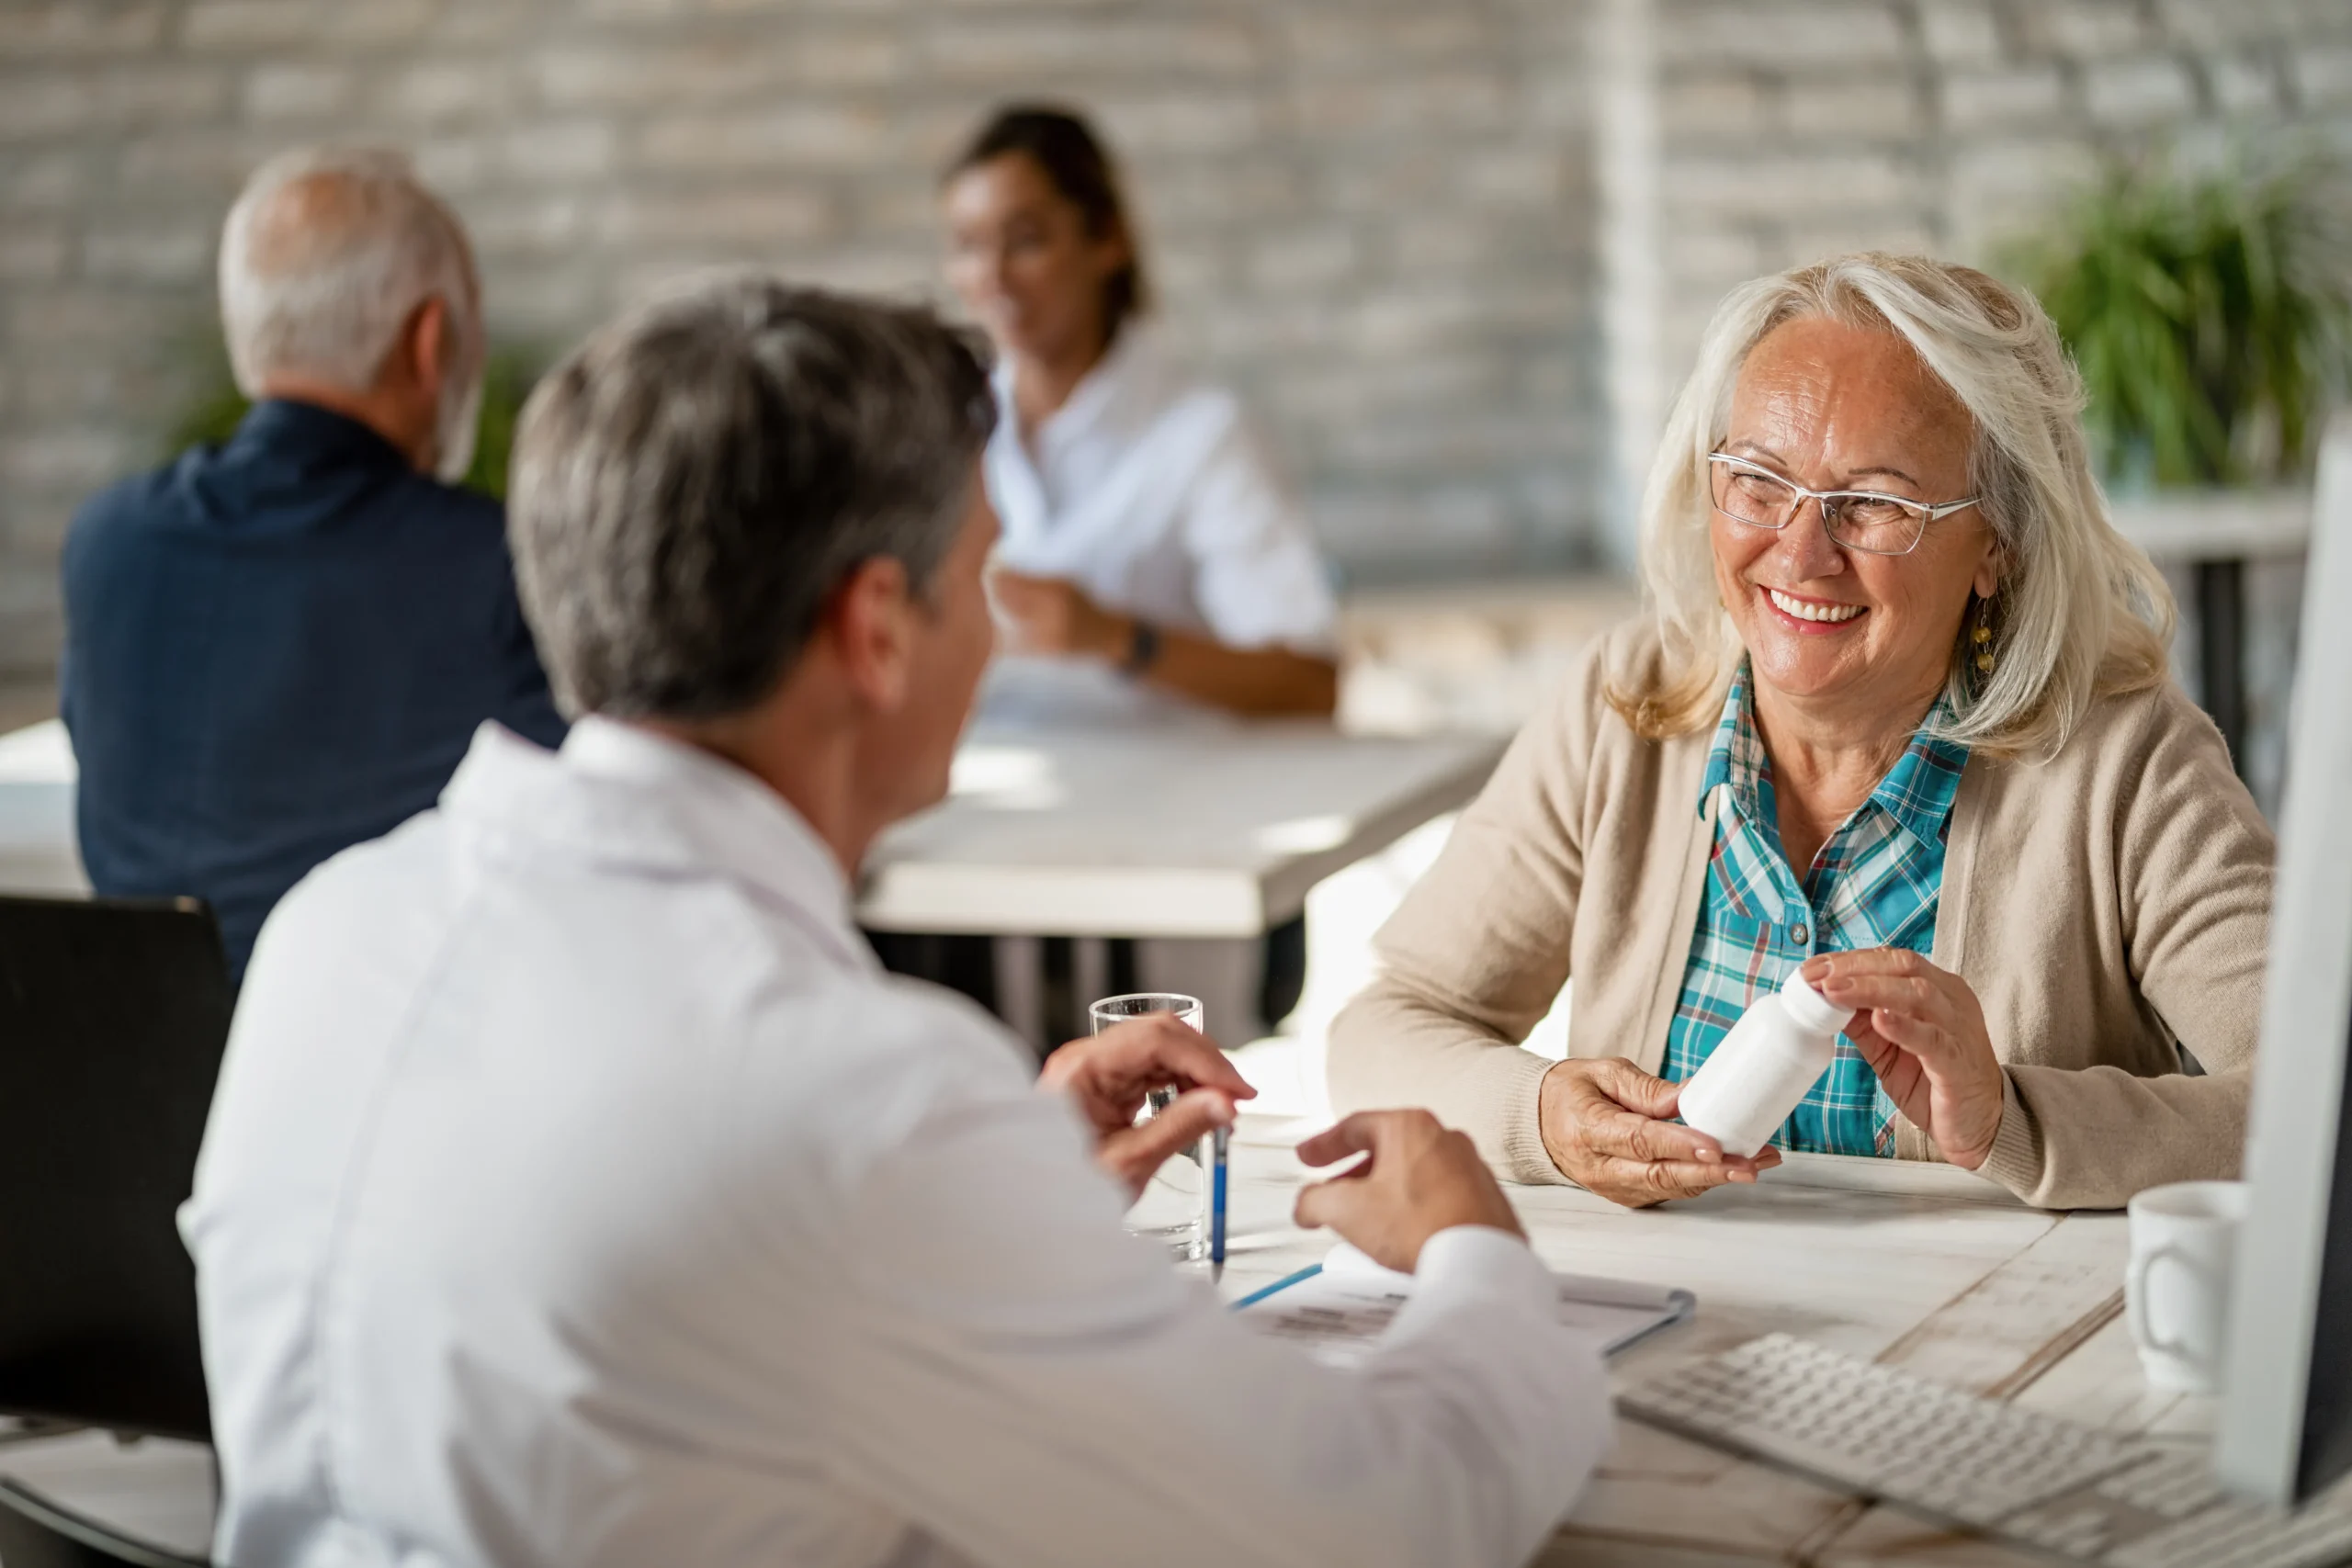 An older woman holds prescriptions and discusses with a doctor that sits at keyboard. Another doctor-patient pair sits in the background.